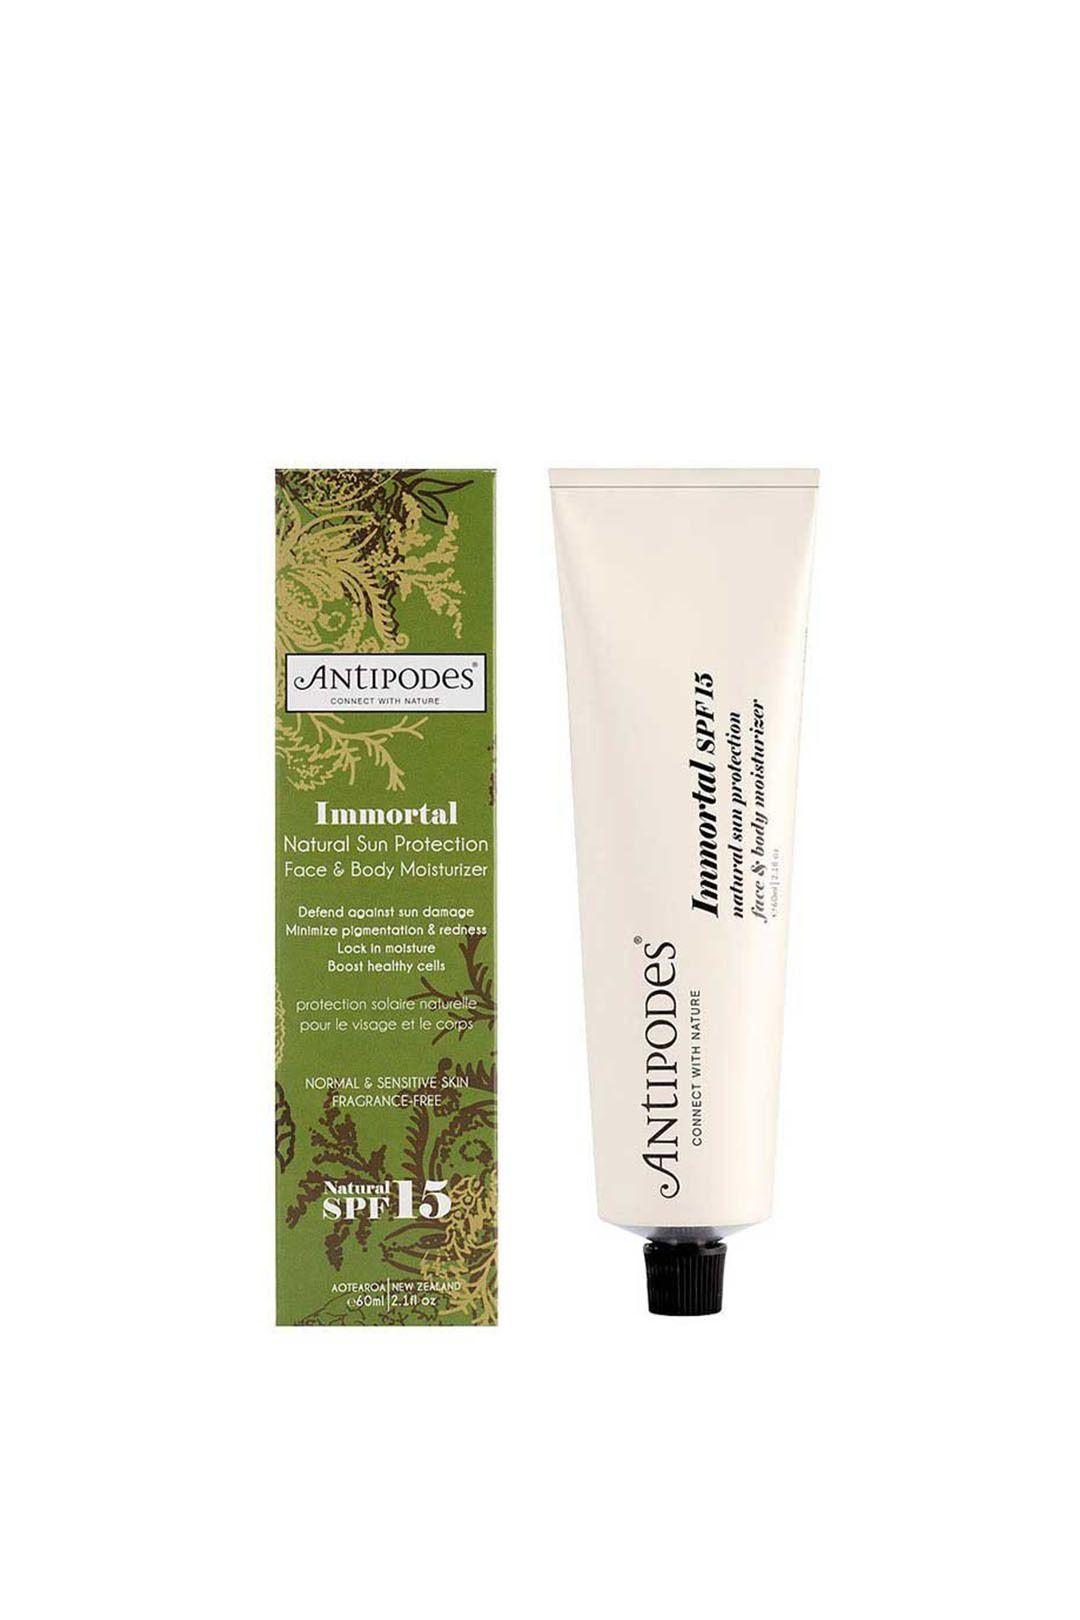 Antipodes-Immortal-SPF-15-Products